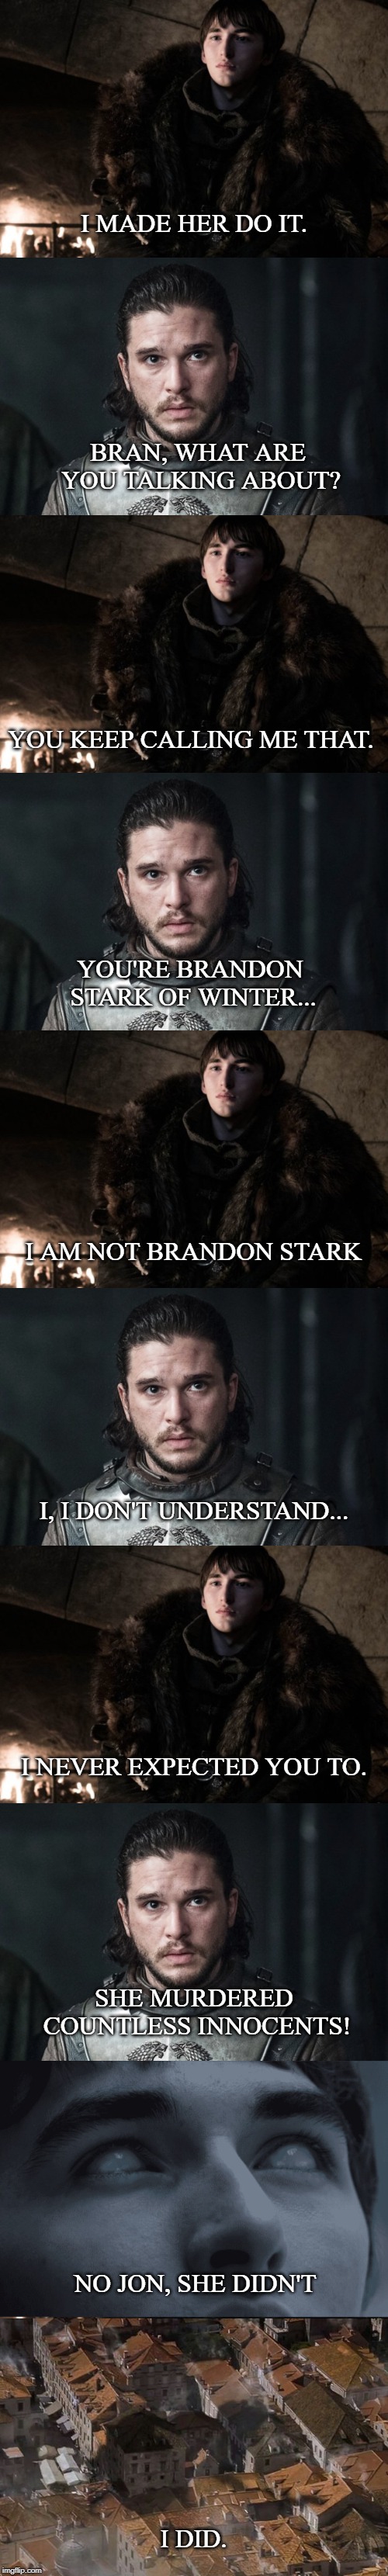 Game of Thrones S08E06 | I MADE HER DO IT. BRAN, WHAT ARE YOU TALKING ABOUT? YOU KEEP CALLING ME THAT. YOU'RE BRANDON STARK OF WINTER... I AM NOT BRANDON STARK; I, I DON'T UNDERSTAND... I NEVER EXPECTED YOU TO. SHE MURDERED COUNTLESS INNOCENTS! NO JON, SHE DIDN'T; I DID. | image tagged in game of thrones,bran stark,jon snow | made w/ Imgflip meme maker